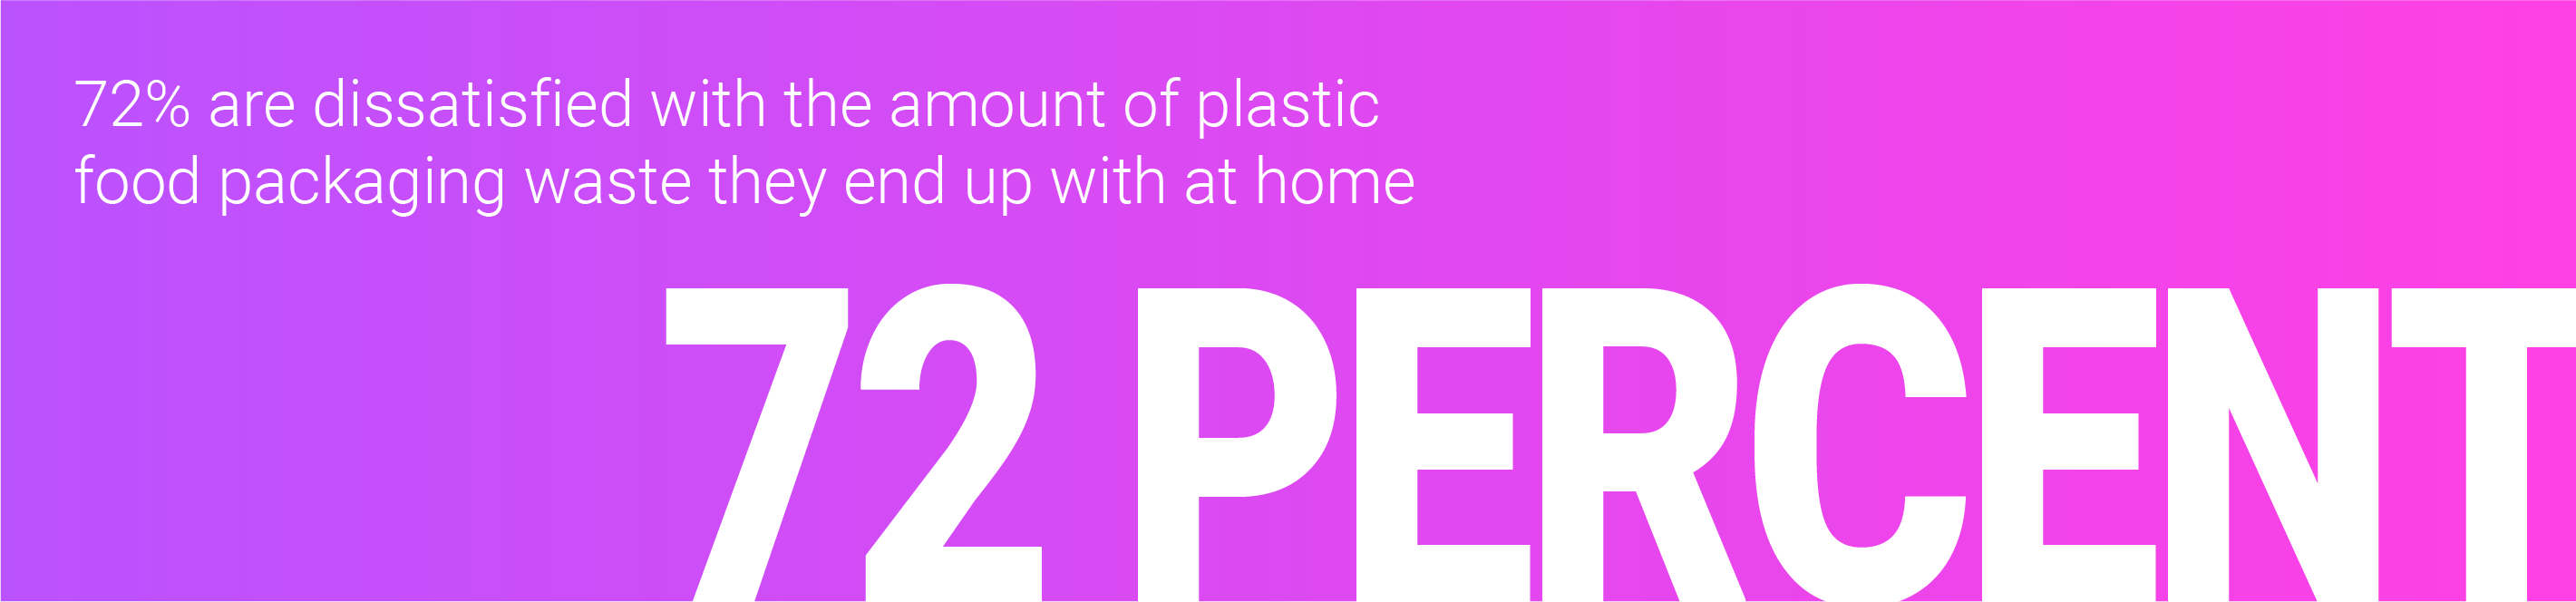 •	72% are dissatisfied with the amount of plastic food packaging waste they end up with at home